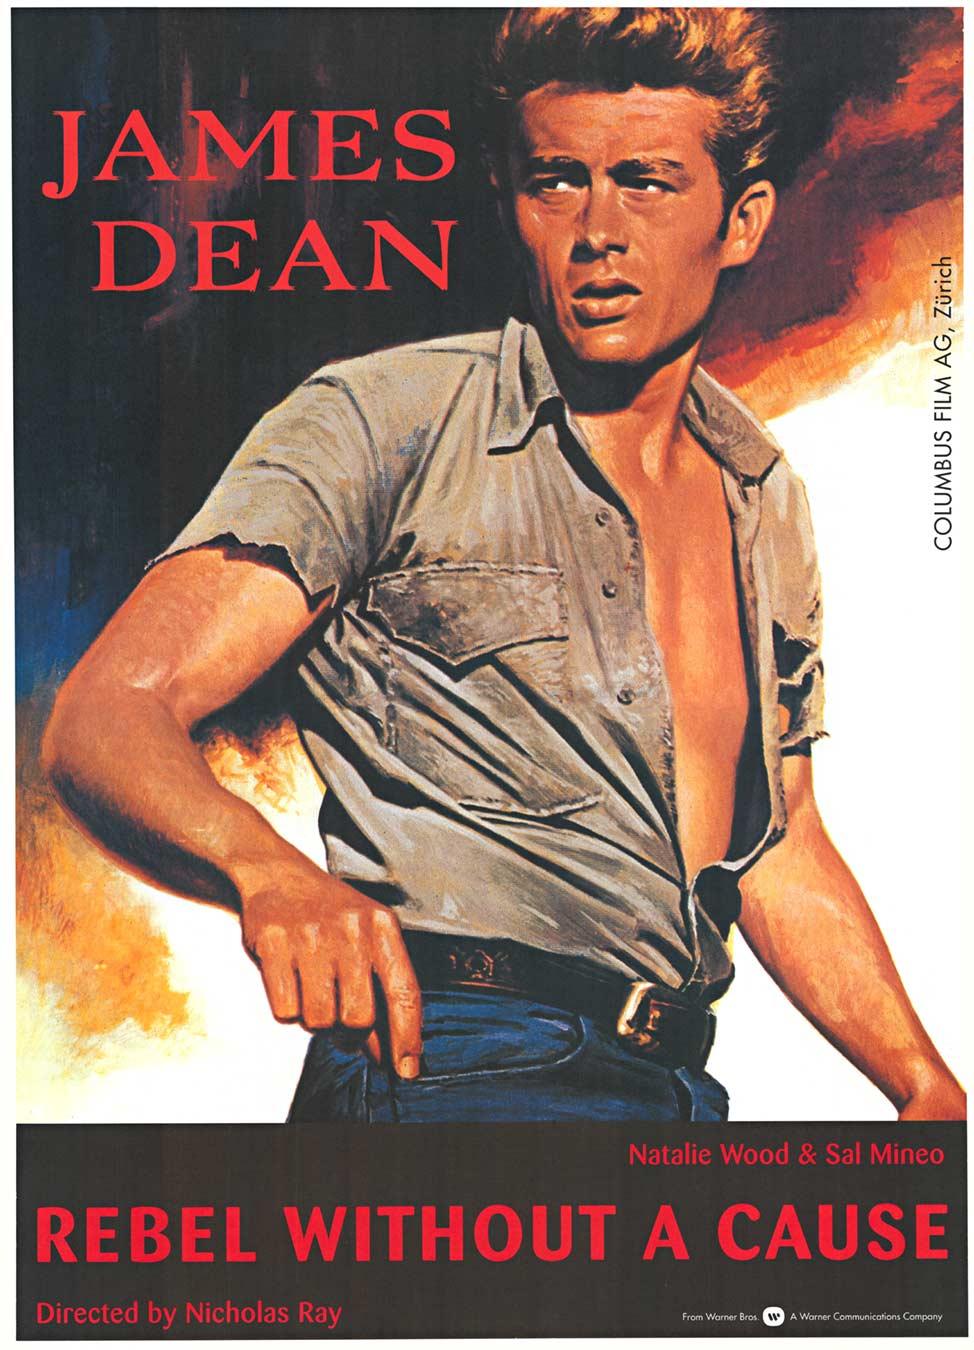 Unknown Figurative Print - Original James Dean  Rebel Without a Cause vintage Swiss movie poster